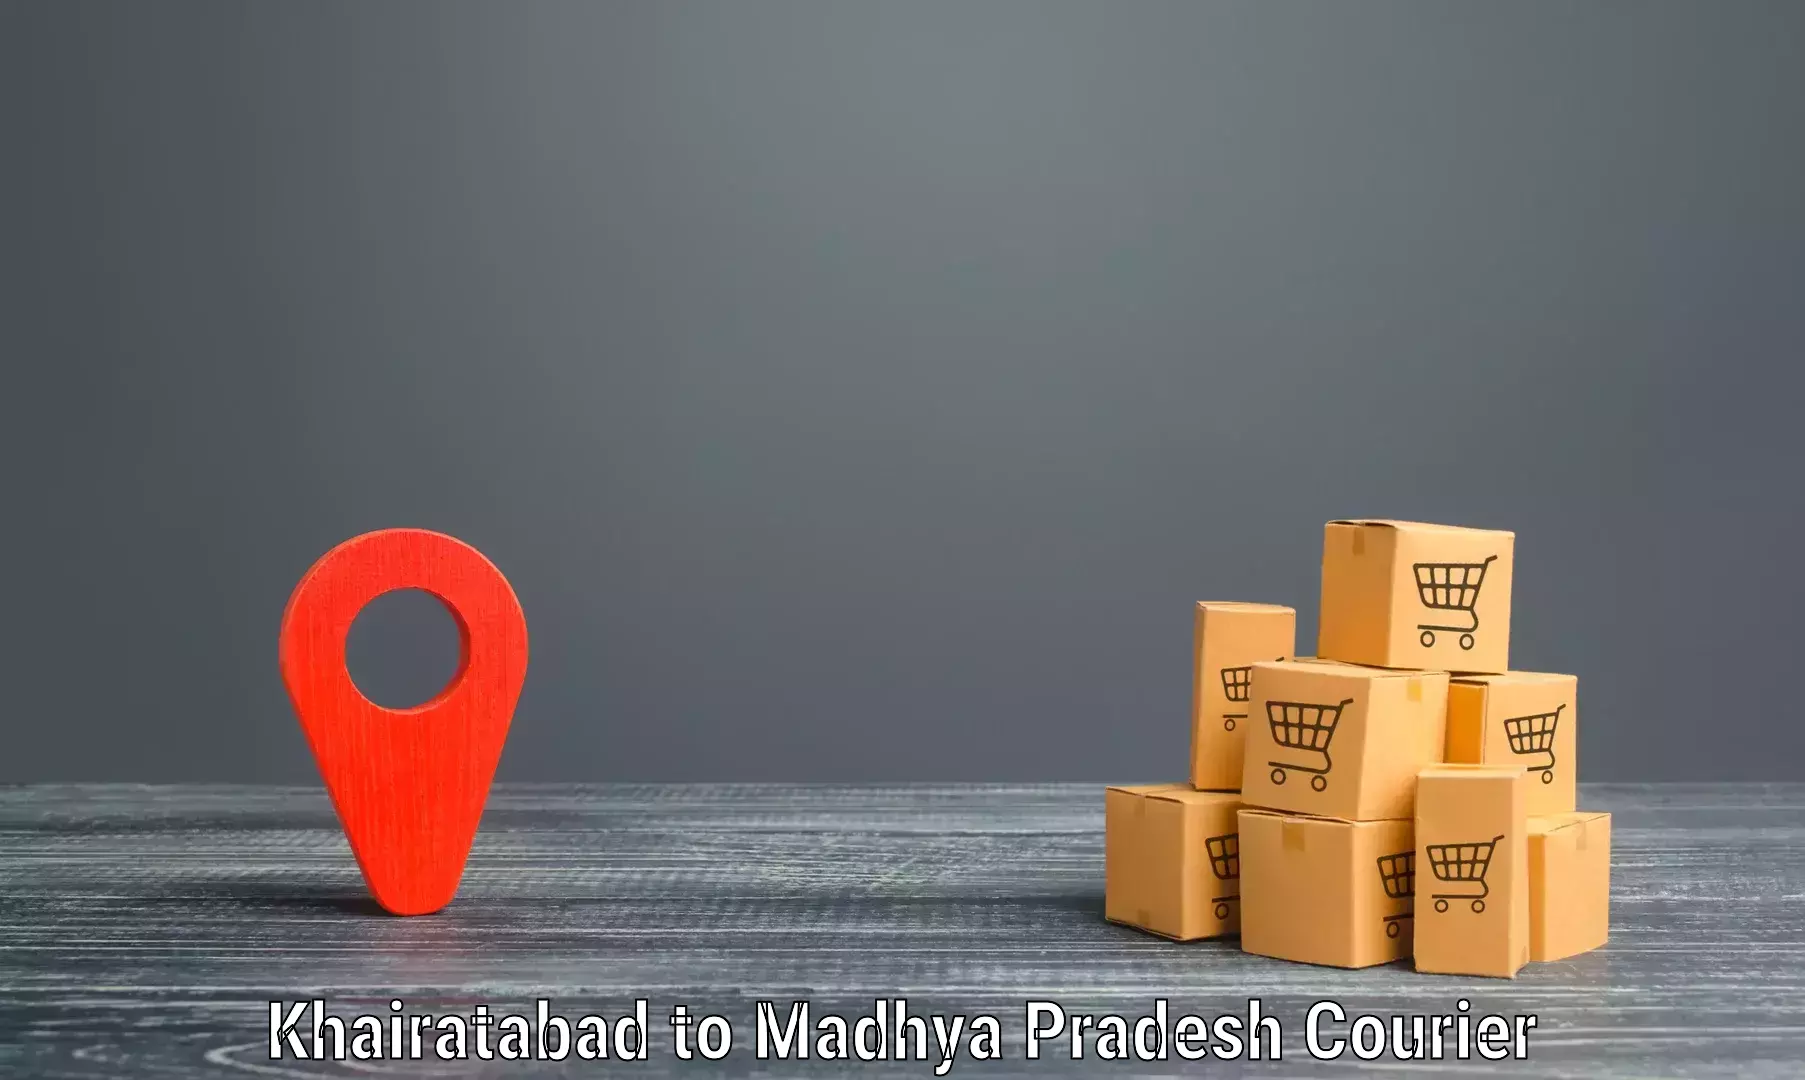 Flexible delivery scheduling Khairatabad to Madhya Pradesh